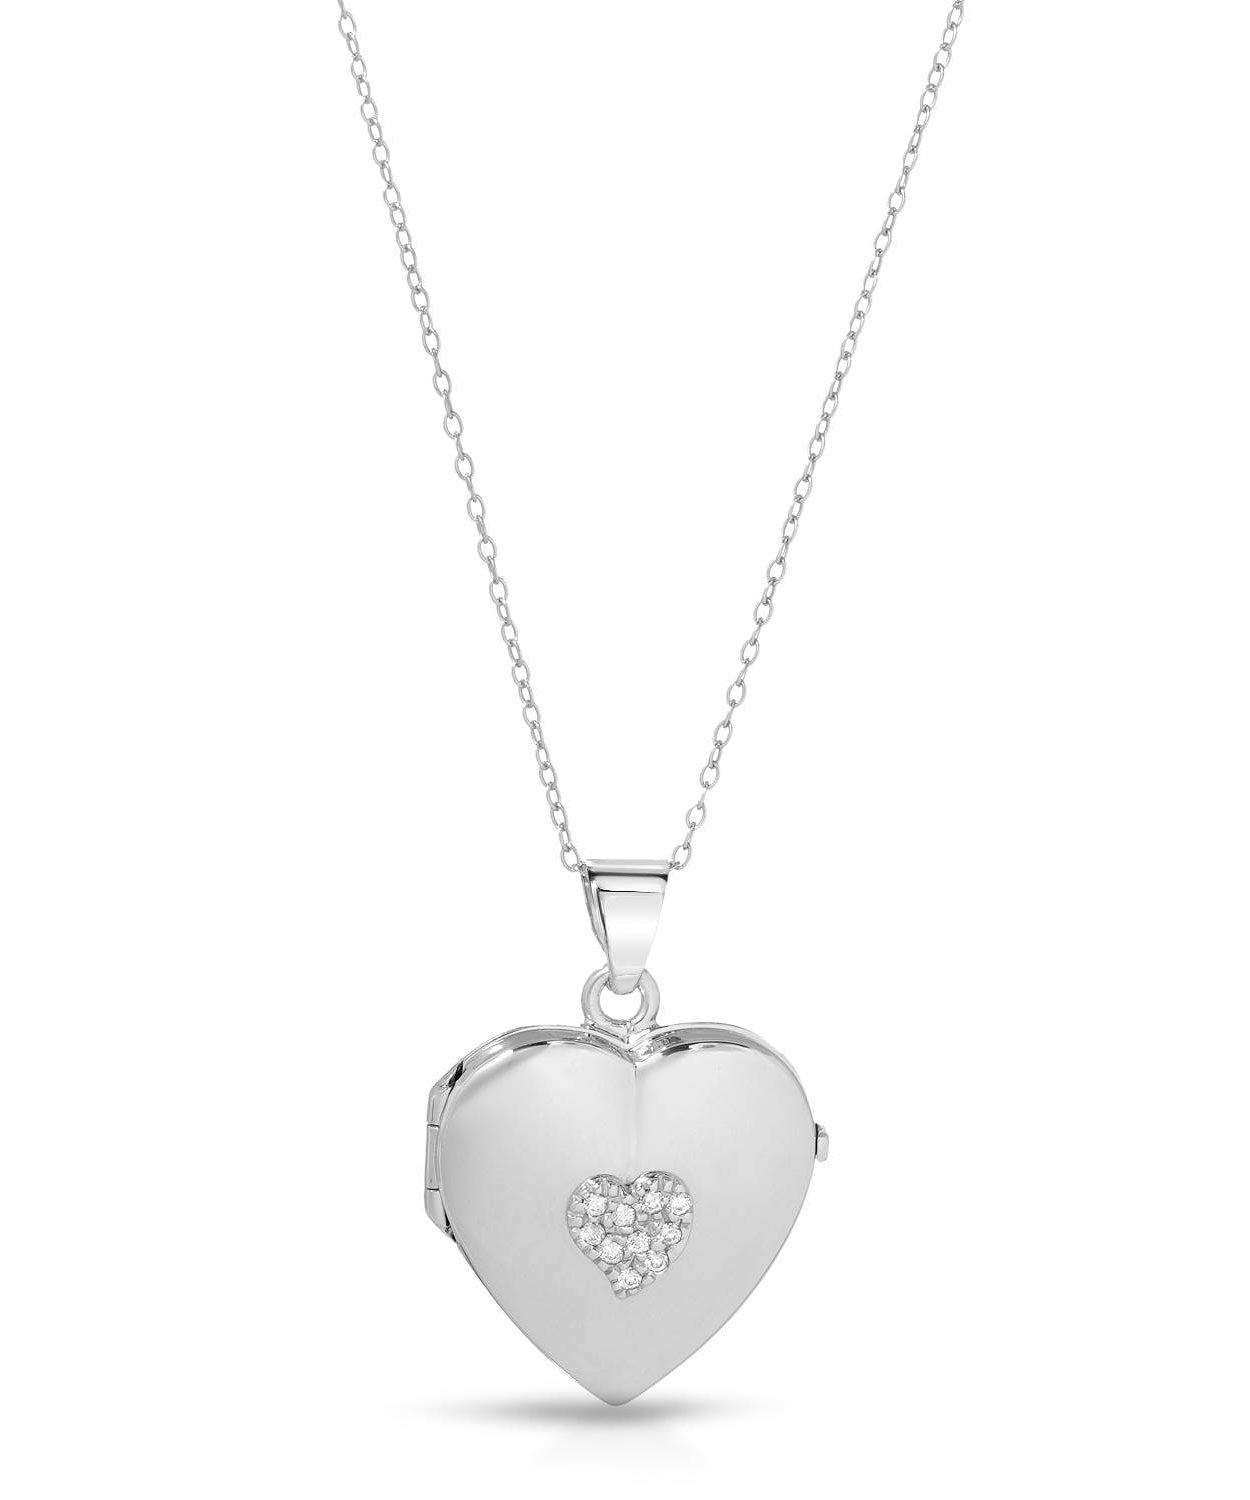 Patterns of Love Collection Brilliant Cut Cubic Zirconia Rhodium Plated 925 Sterling Silver Heart Locket Pendant With Chain - Made in Italy View 1